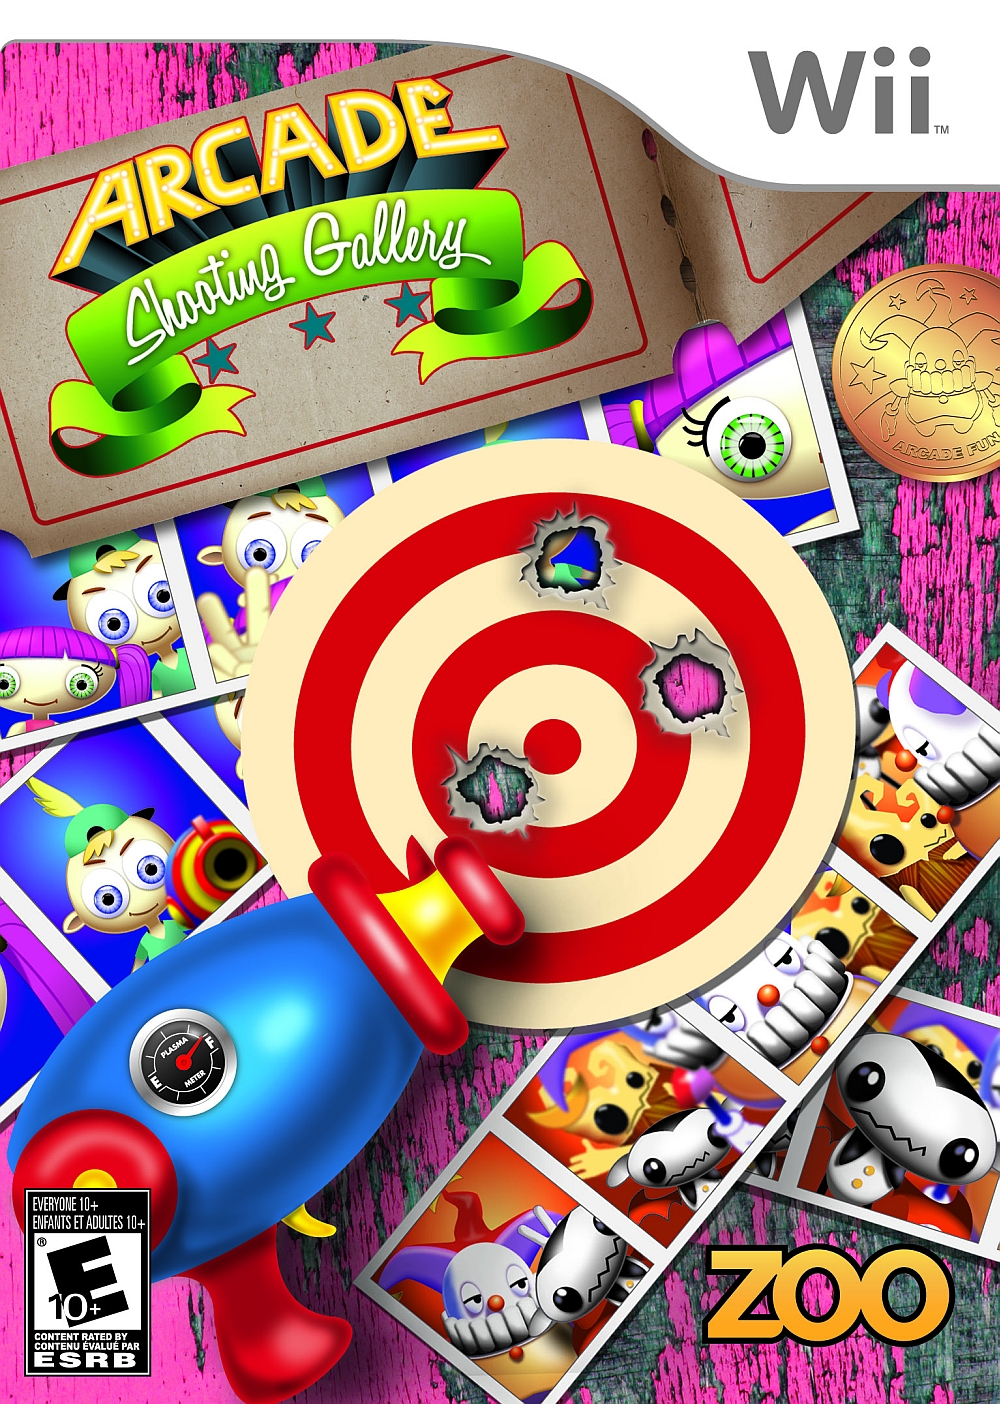 Arcade Shooting Gallery Images